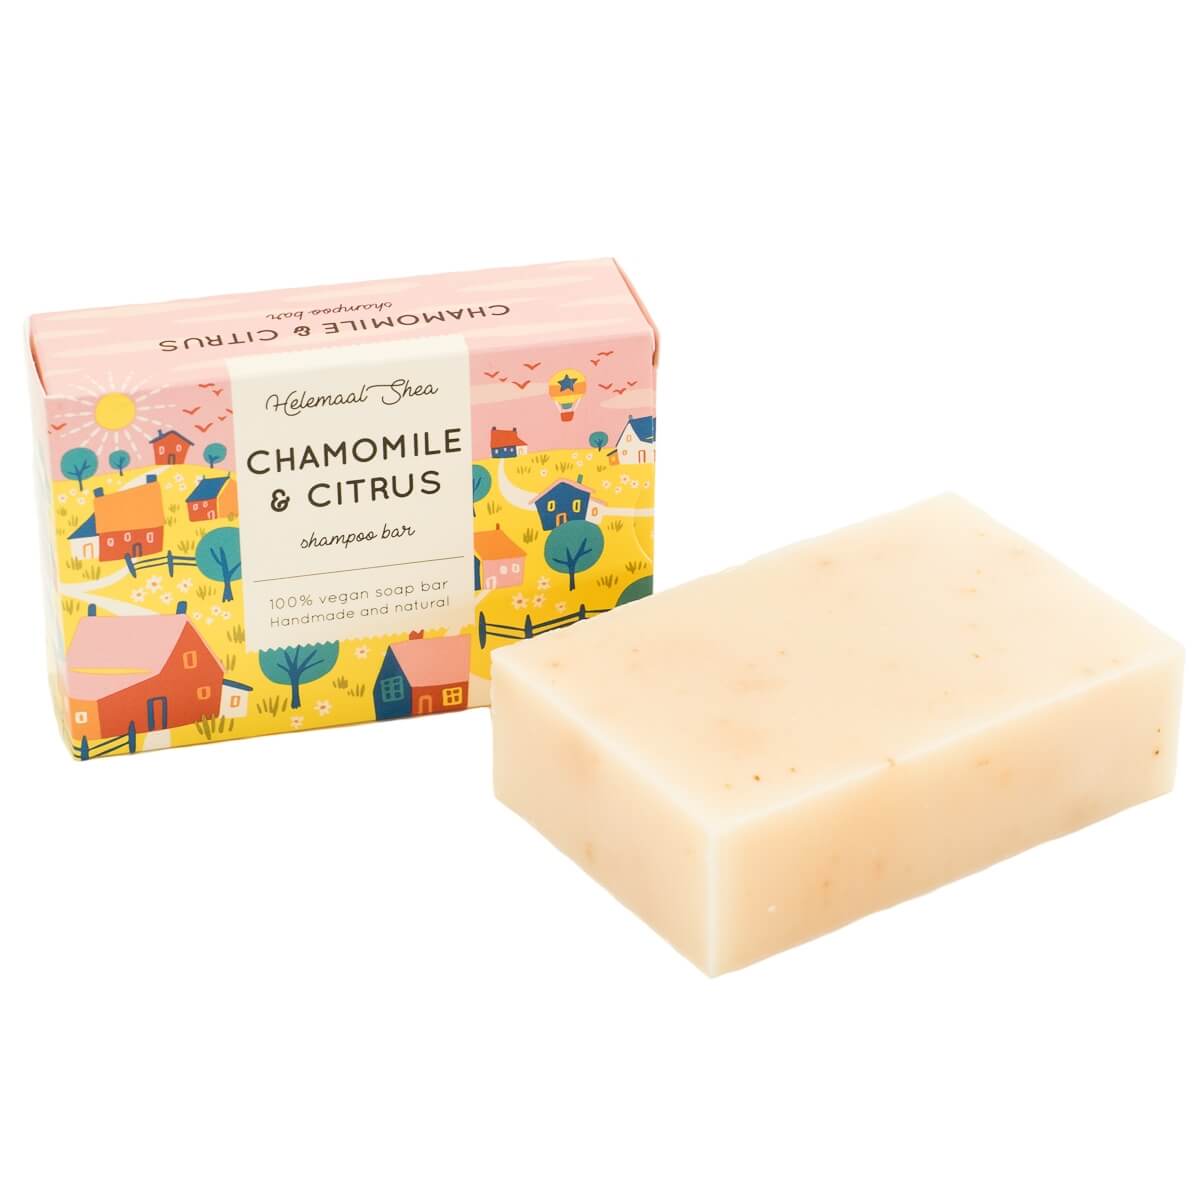 ShampooBar for Blond Hair and extra Shine Chamomile Citrus Helemaal Shea